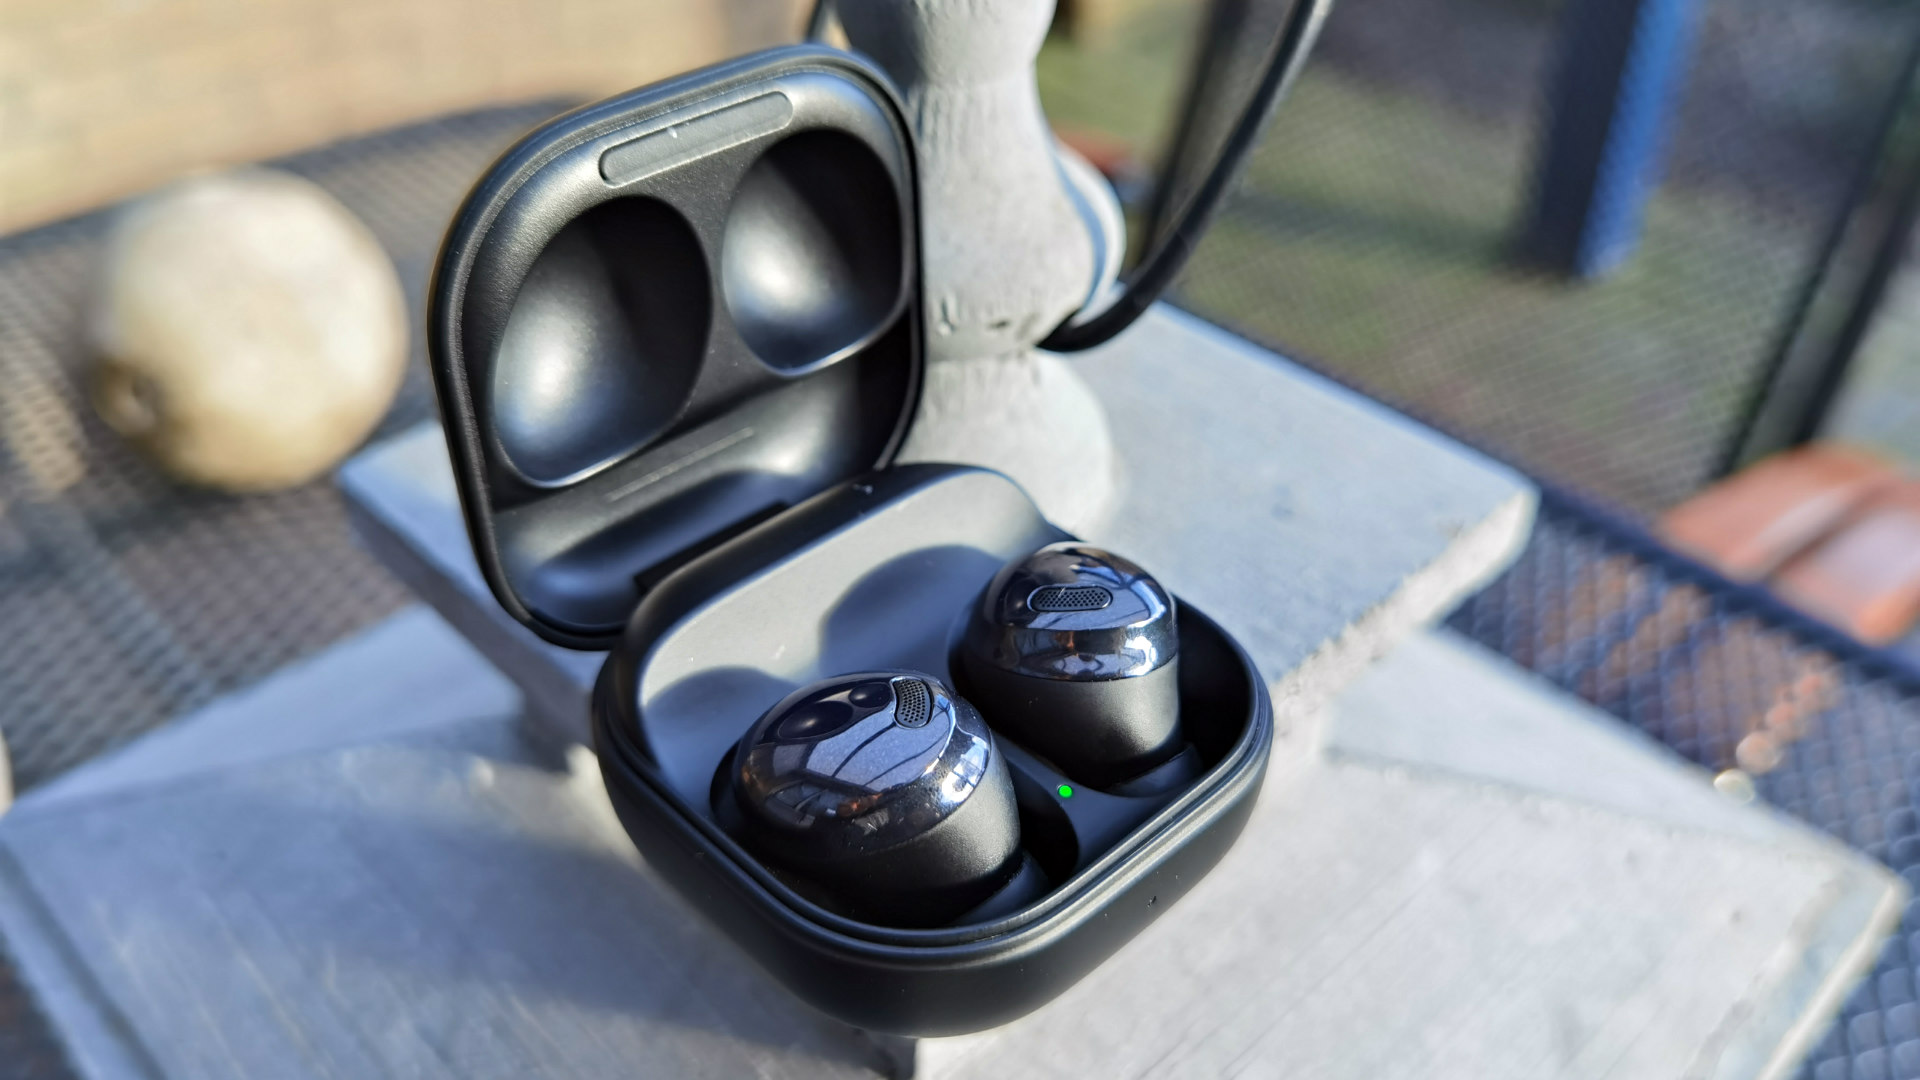 Samsung Galaxy Buds Pro review: great for Samsung phones | TechRadar